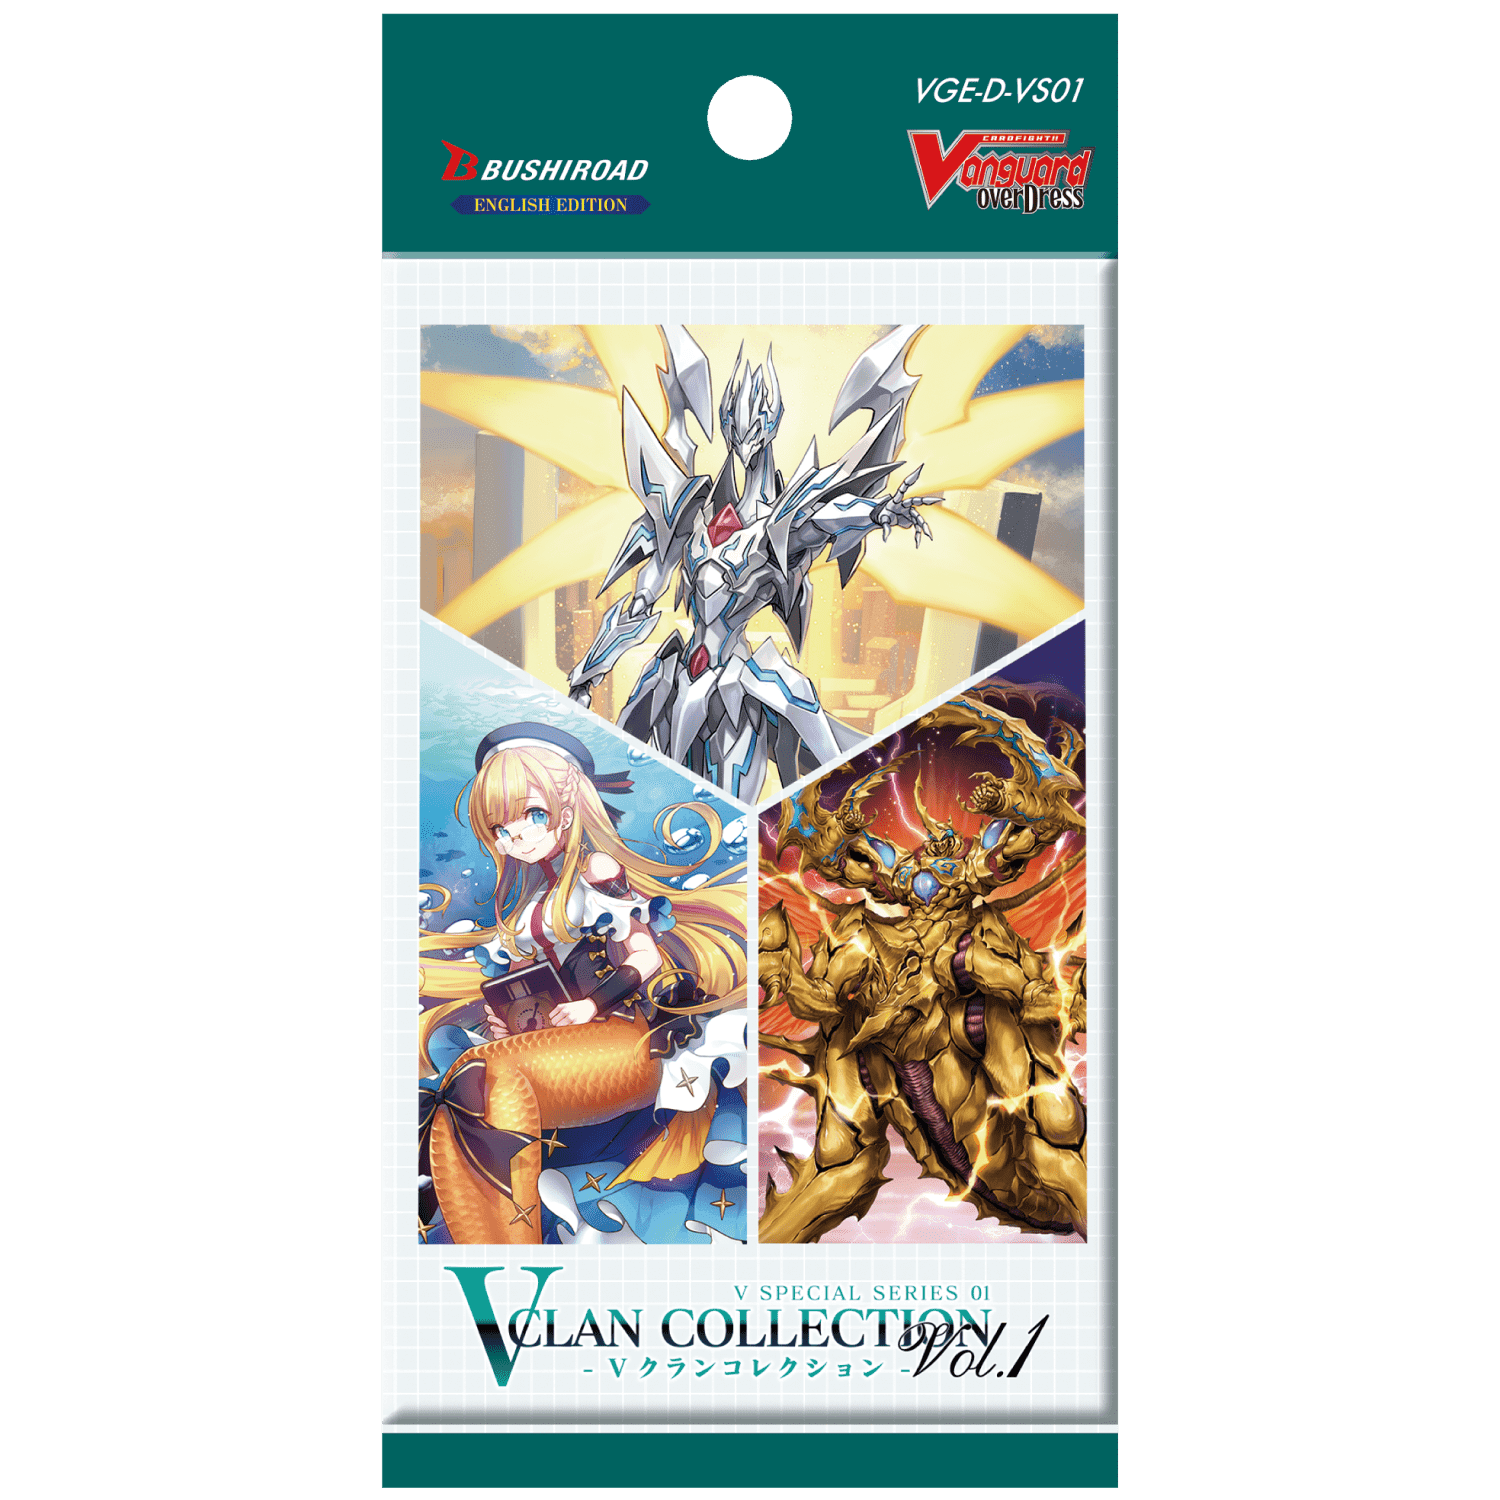 Cardfight!! Vanguard - OverDress: V Special Series - V Clan Collection Vol.1 Booster Pack - The Card Vault